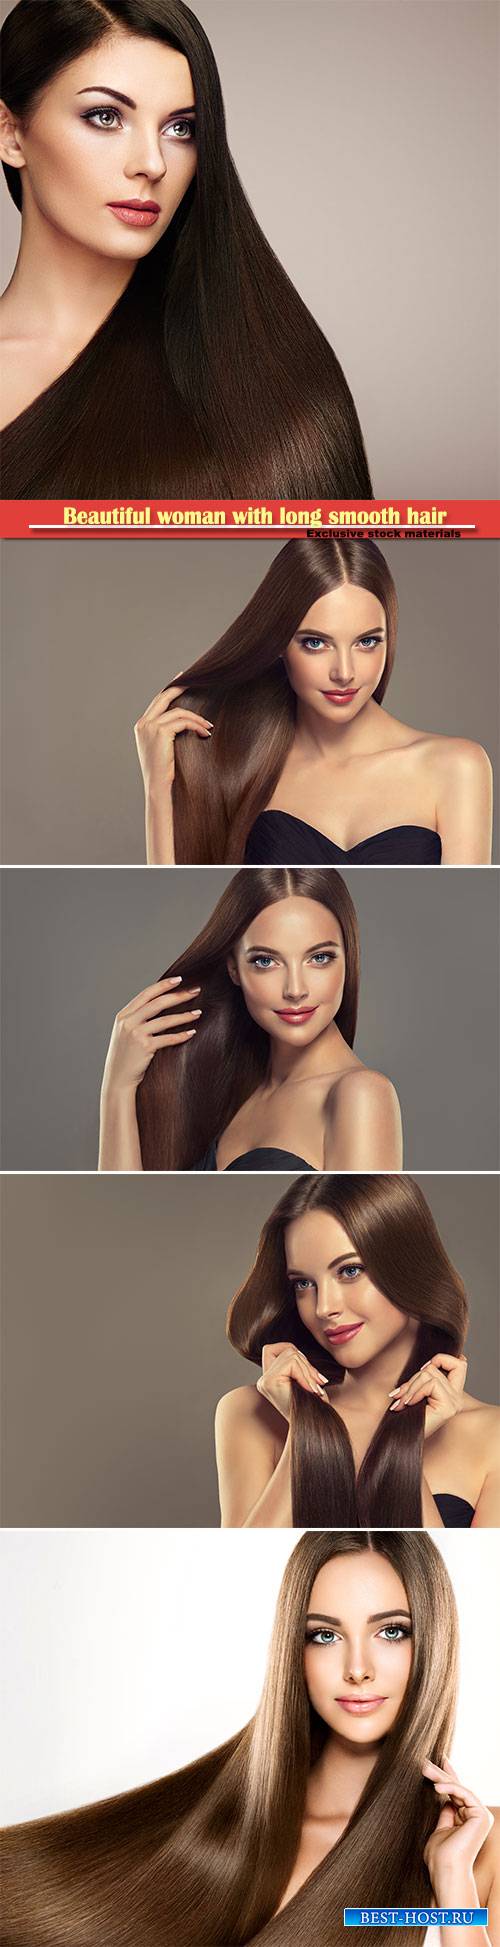 Beautiful woman with long smooth hair